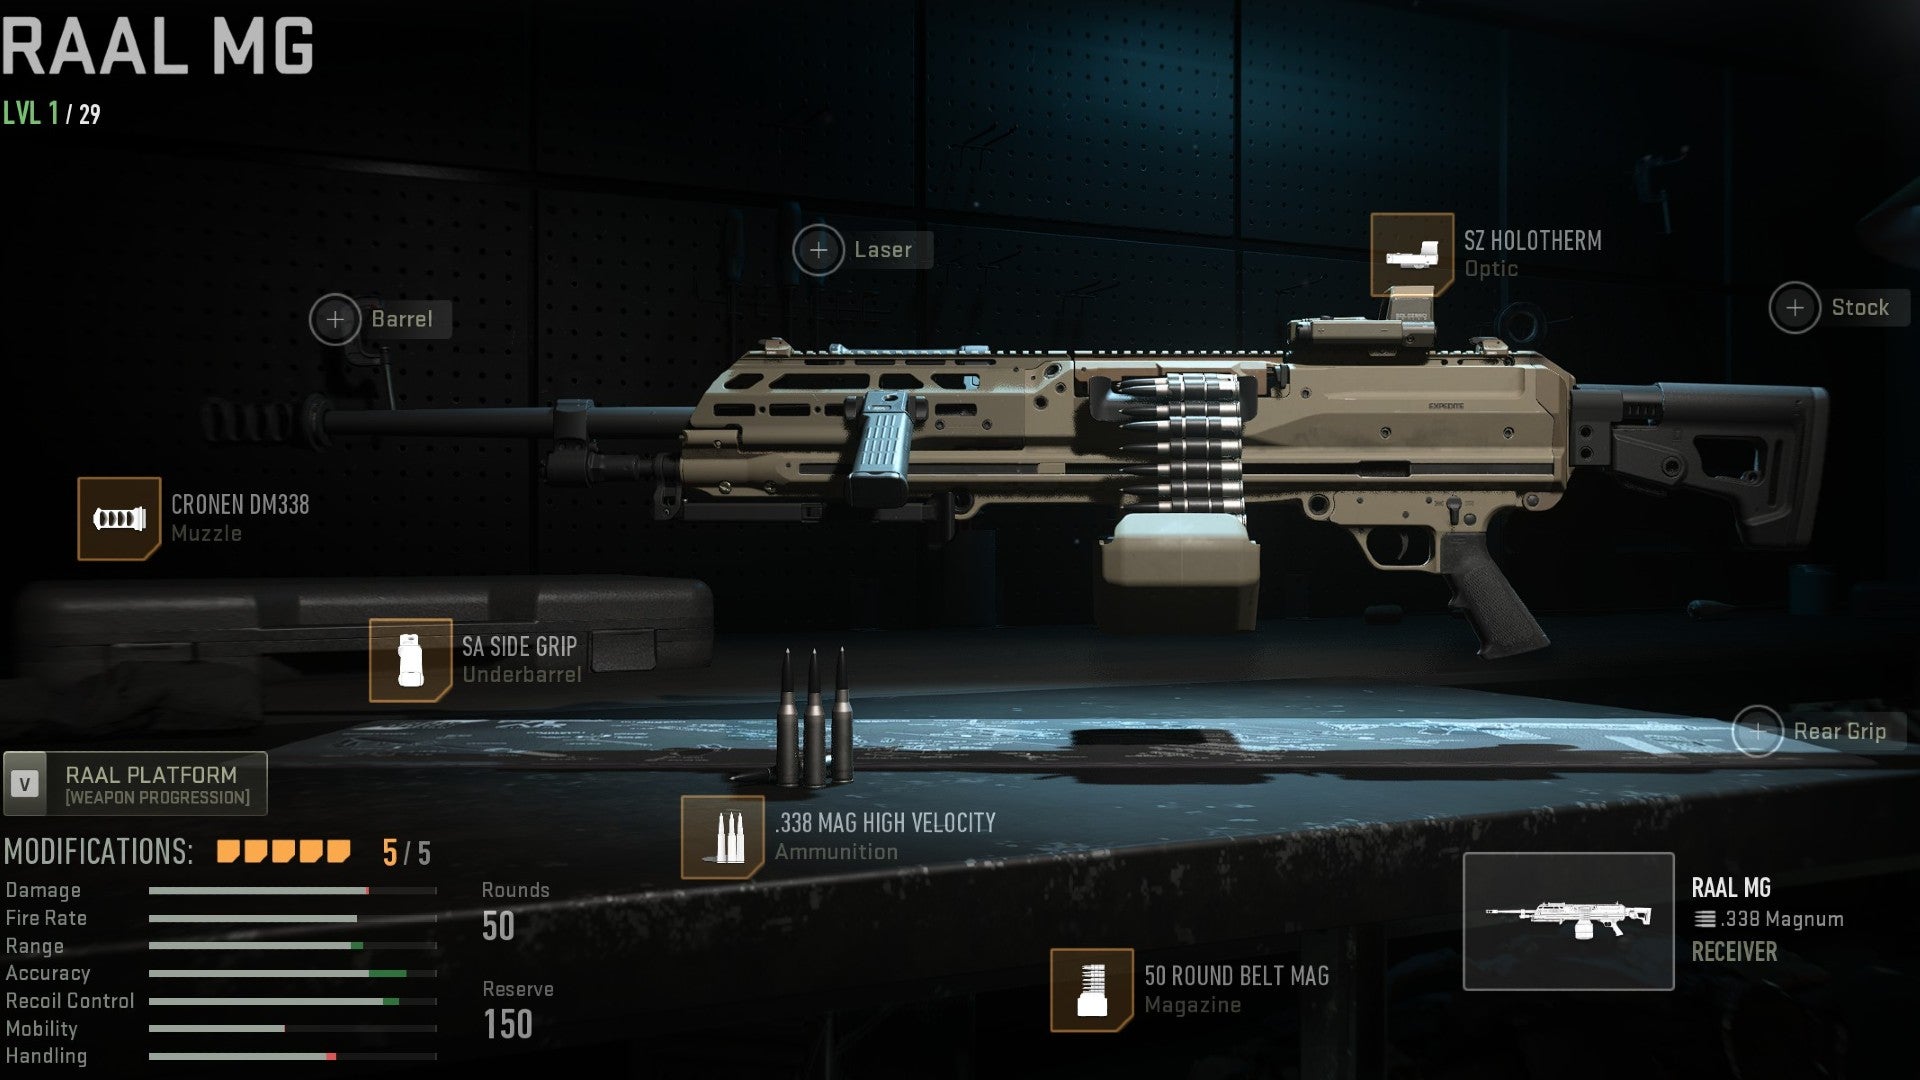 Warzone 2 screenshot showing the Raal MG with the Cronen DM338, SA Side Grip, .338 Mag High Velocity, 50 Round Belt Mag, and SZ Holotherm attached.